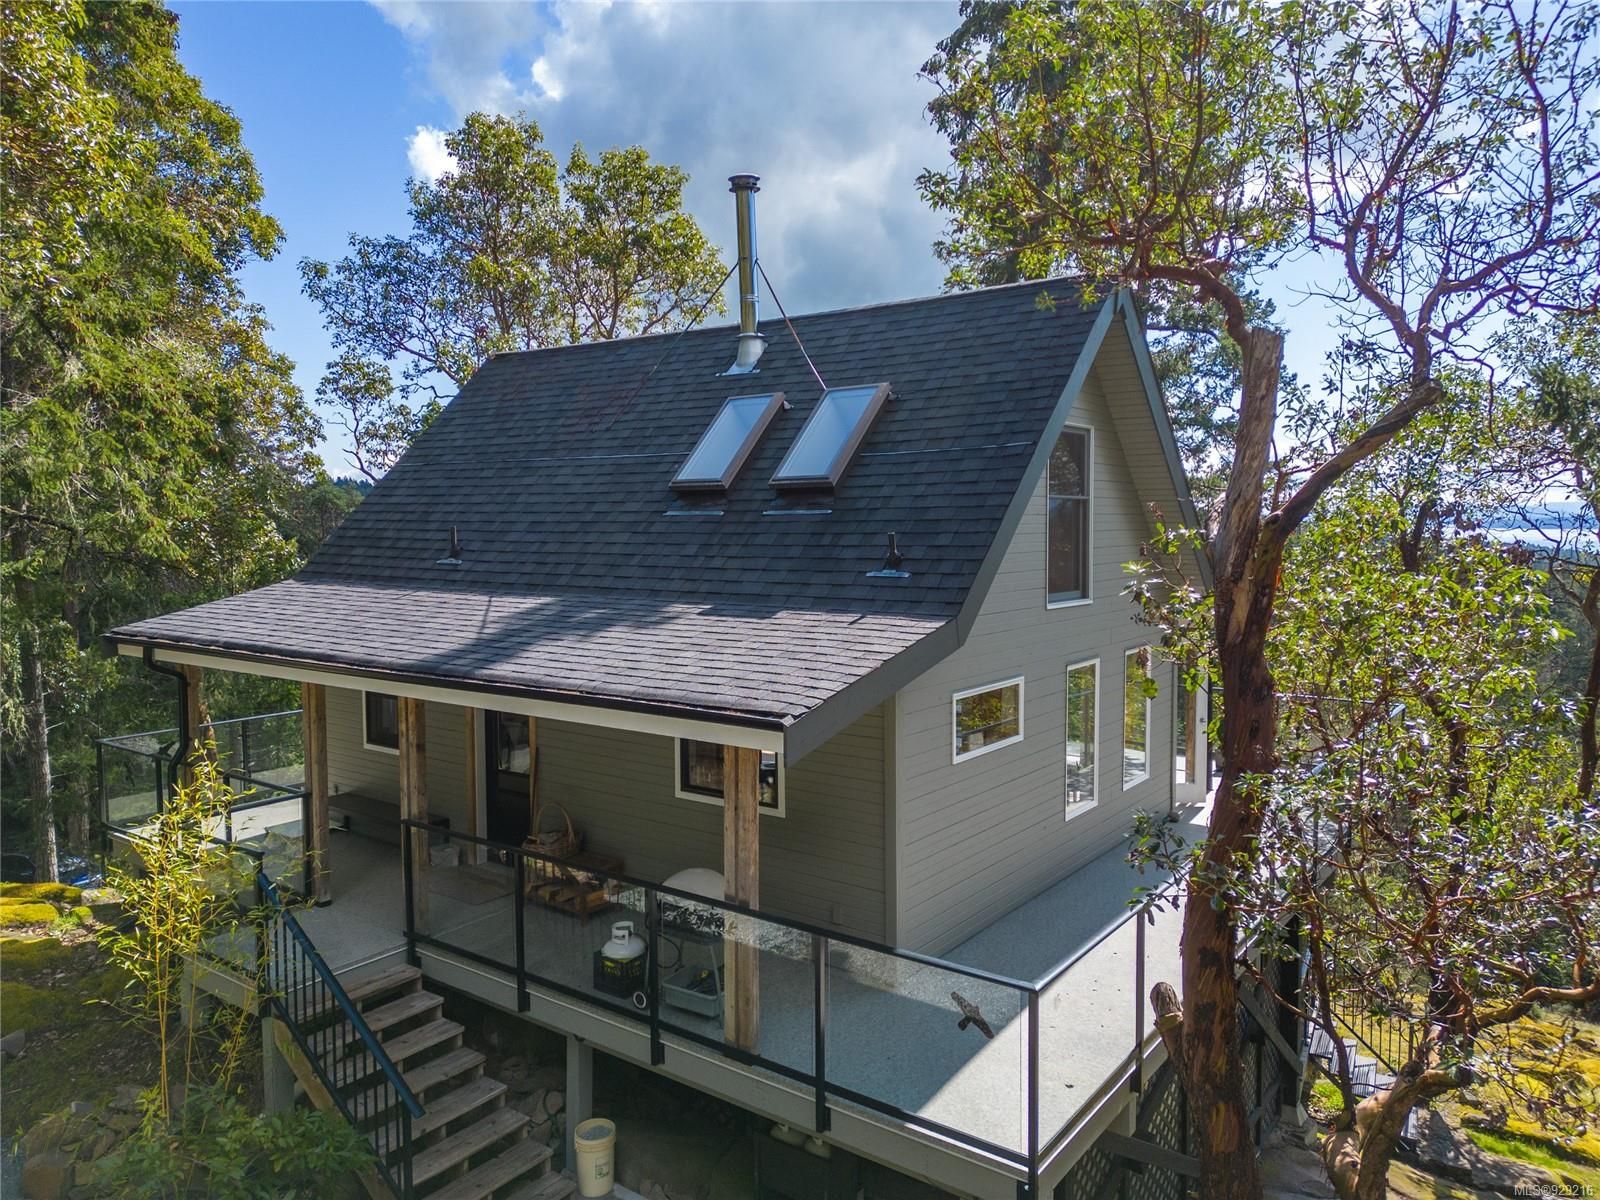 I have sold a property at 3314 Port Washington Rd in Pender Island
